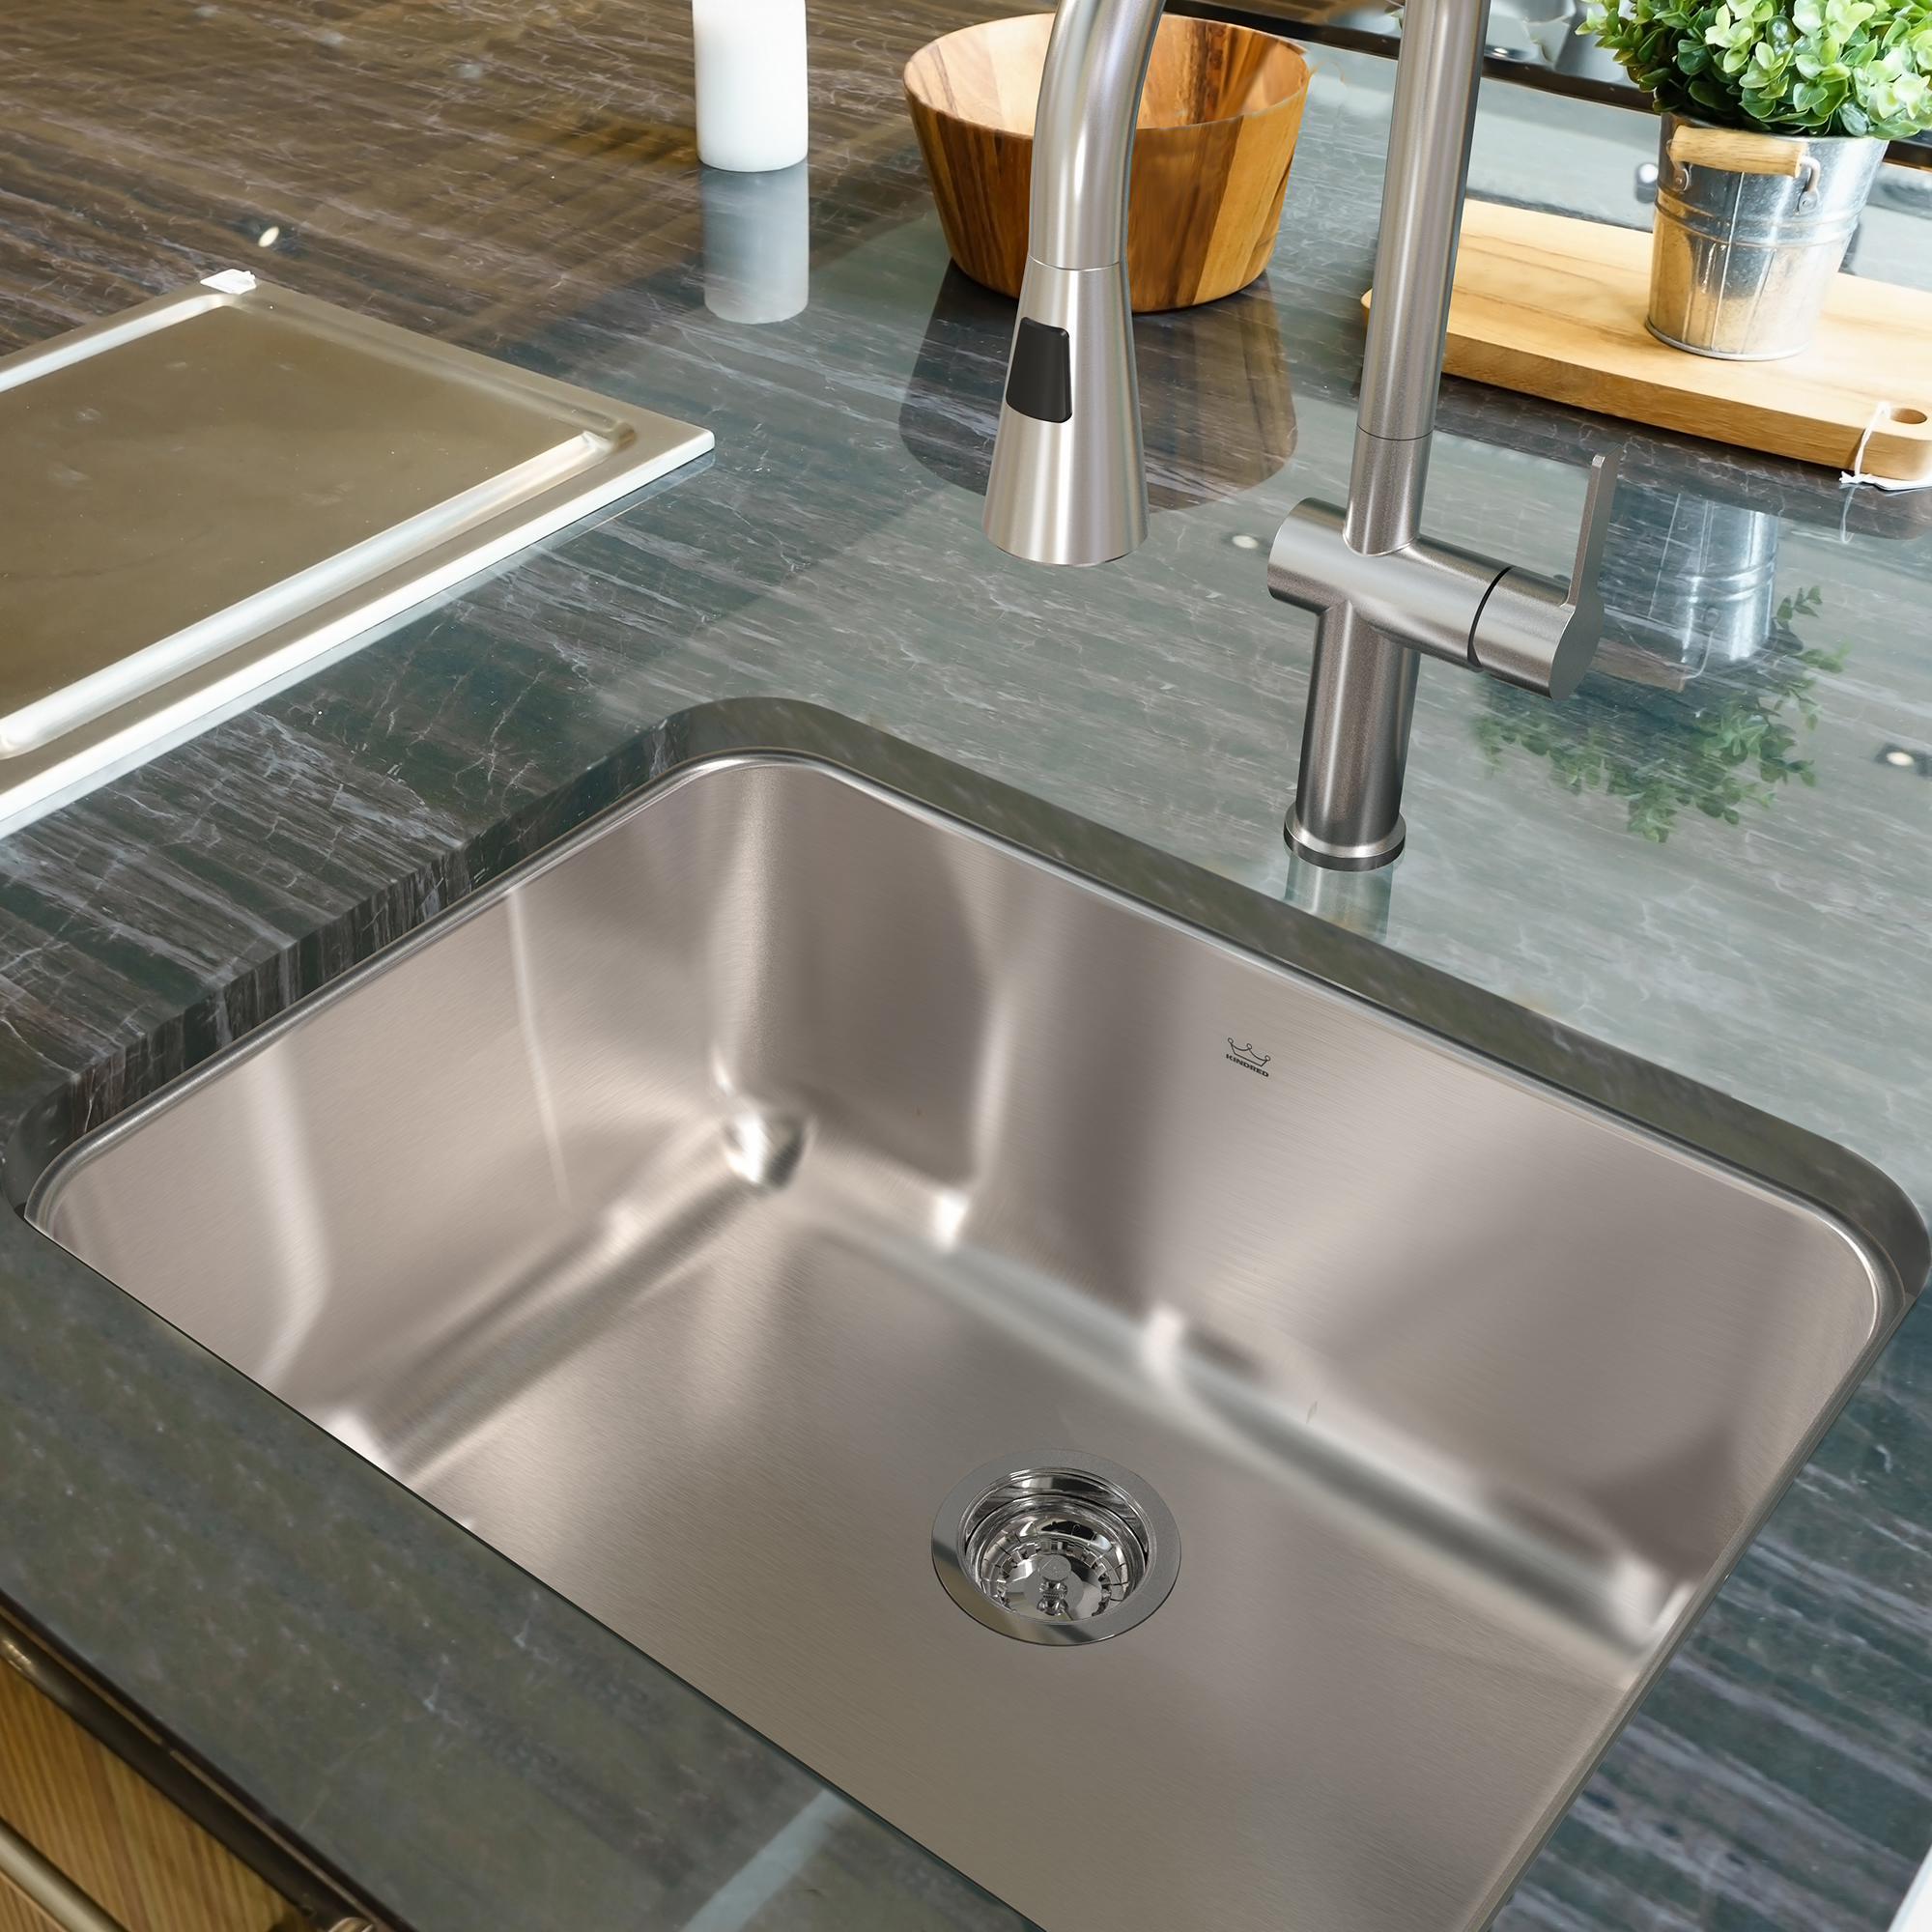 Kindred 1 Bowl Undermount Sink Qsua1925